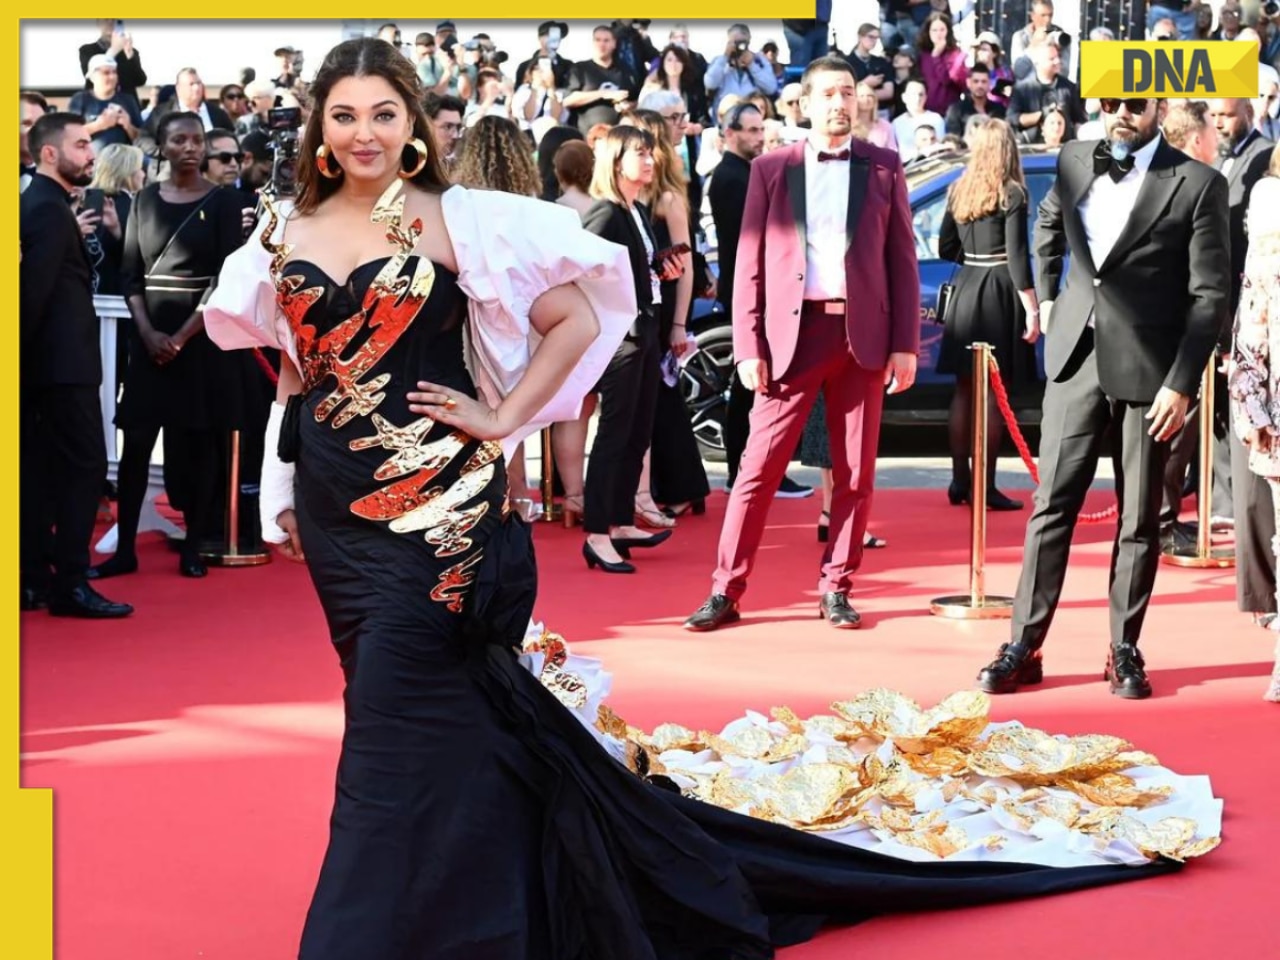 'They did her dirty': Aishwarya Rai fans criticise stylist for her 'failed art project' outfit on Cannes red carpet